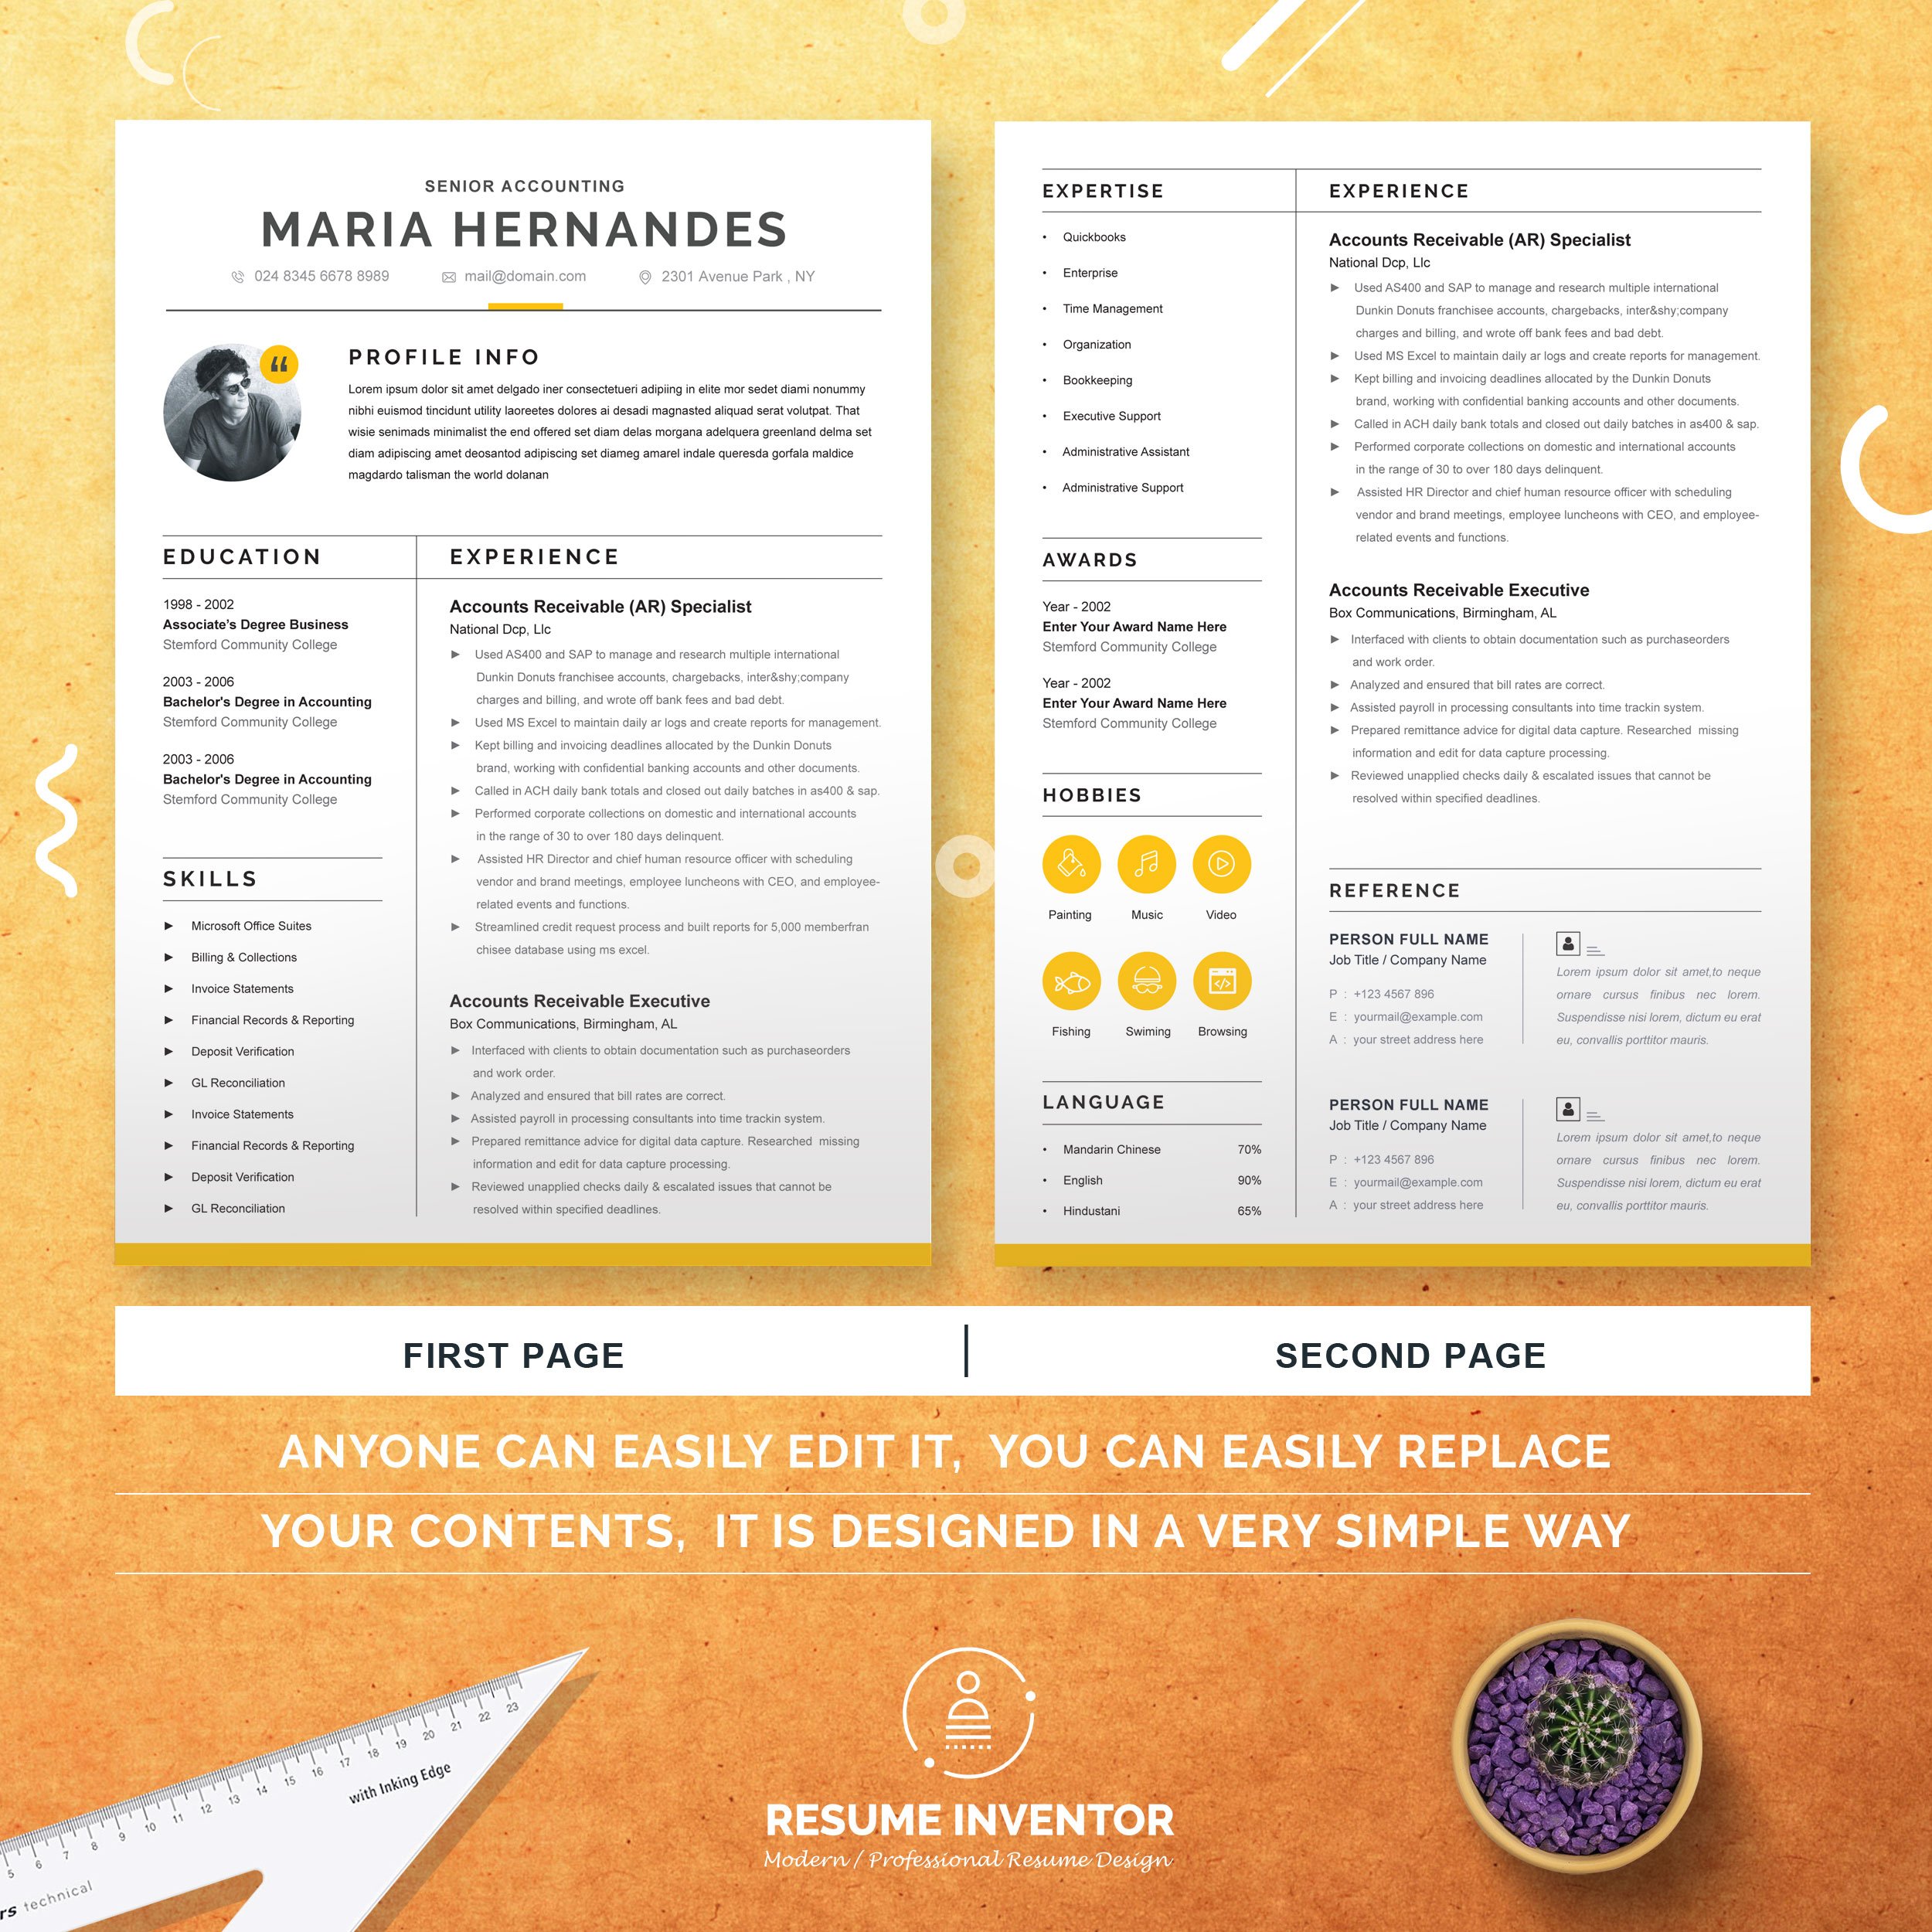 Professional Accountant CV Template preview image.